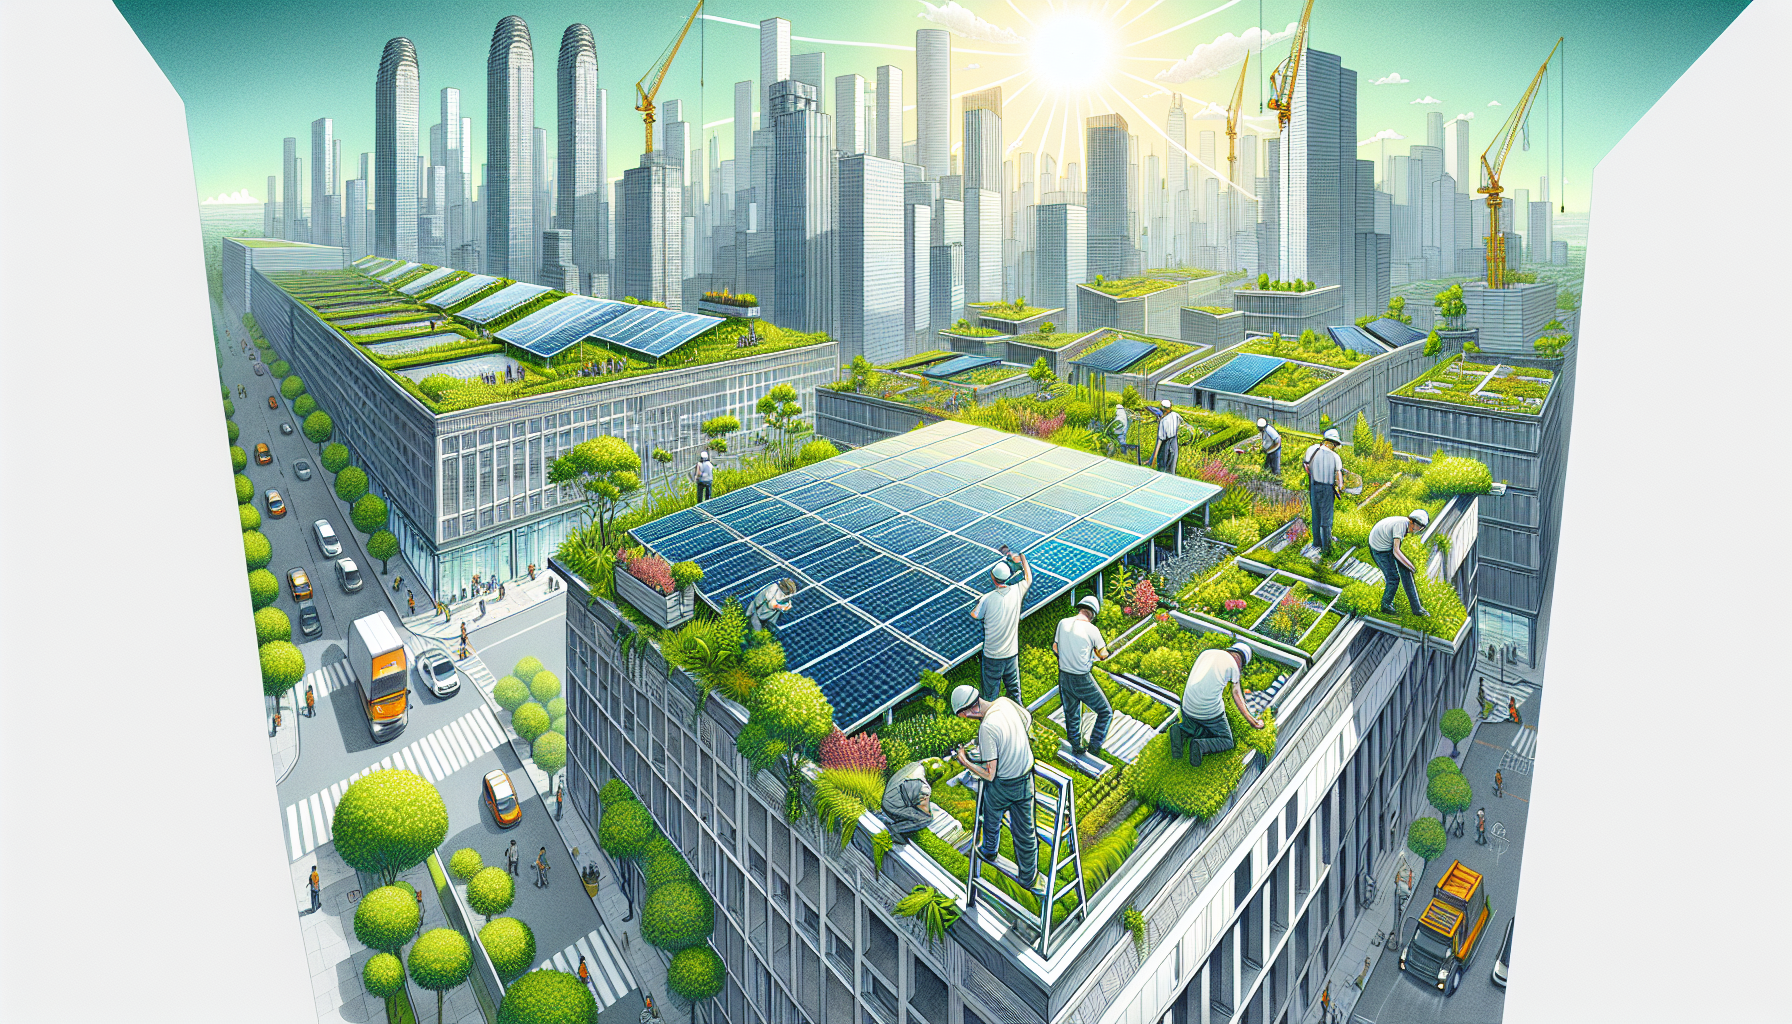 Illustration of solar panels and green roofs